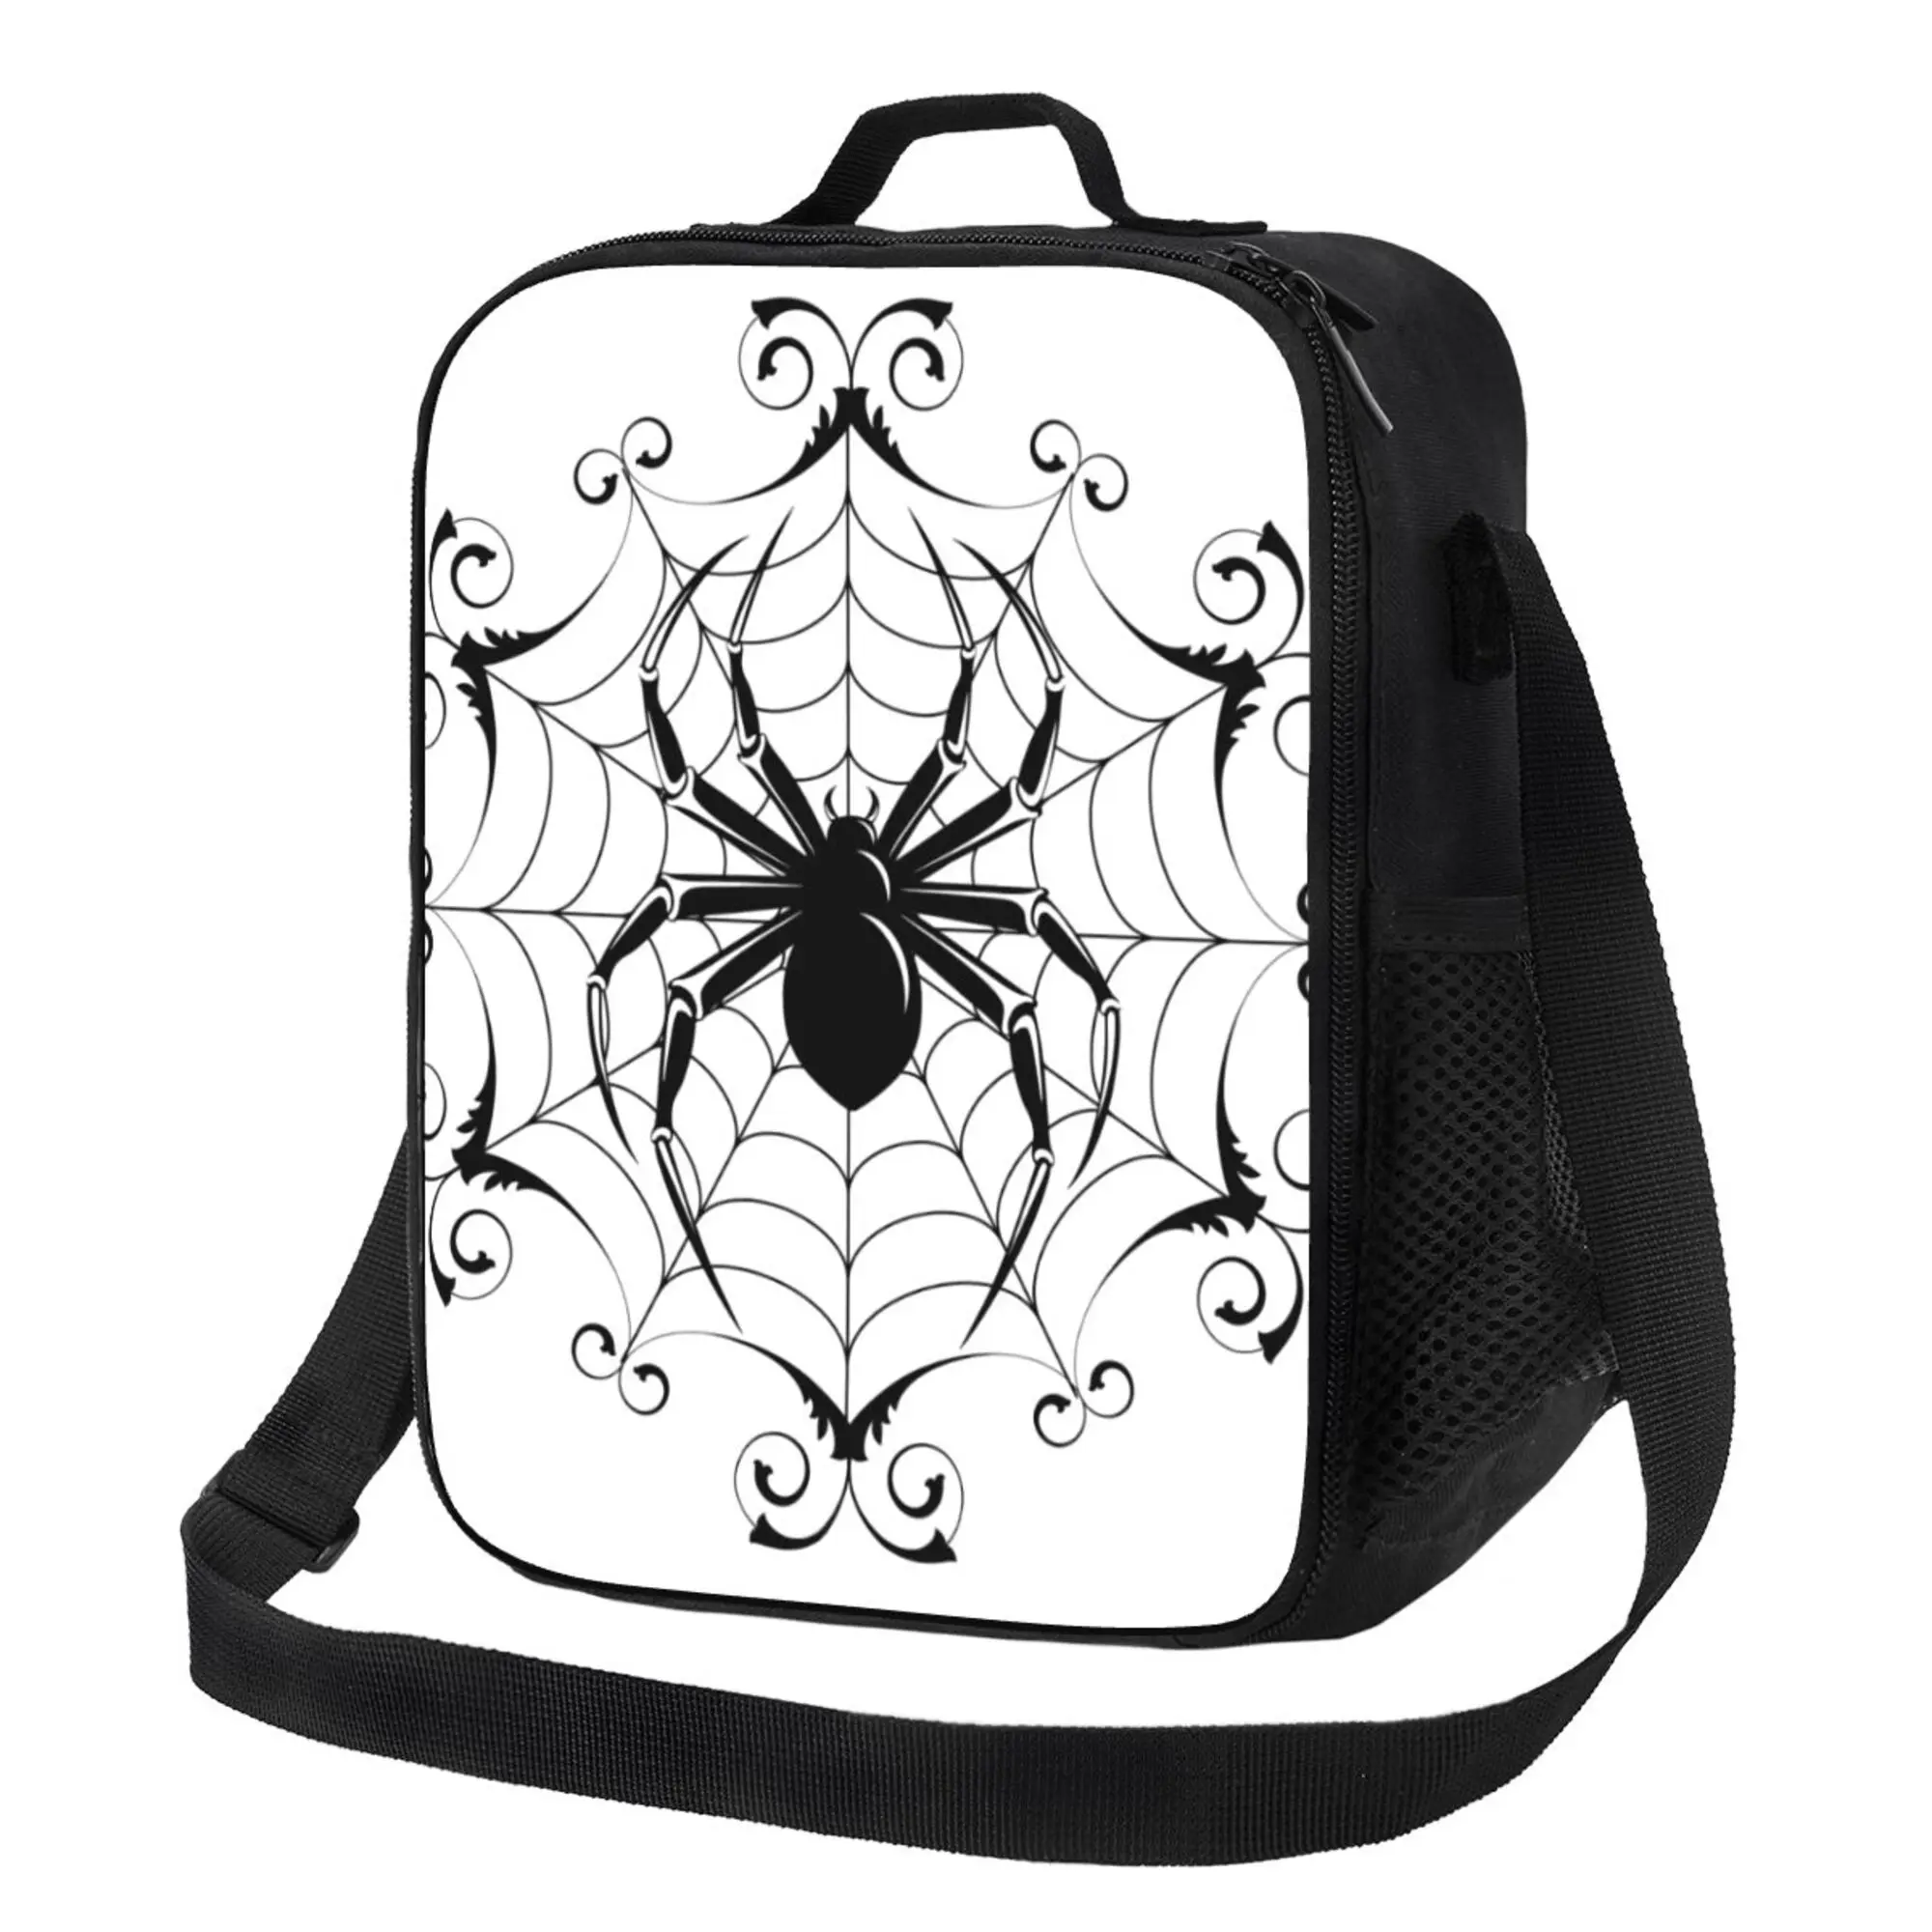 

Gothic Spider Web Pattern Lunch Bag Food Contain Insulated Lunch Bag Bento for Men Women Girls Boys Shcool Work Picnic One Size